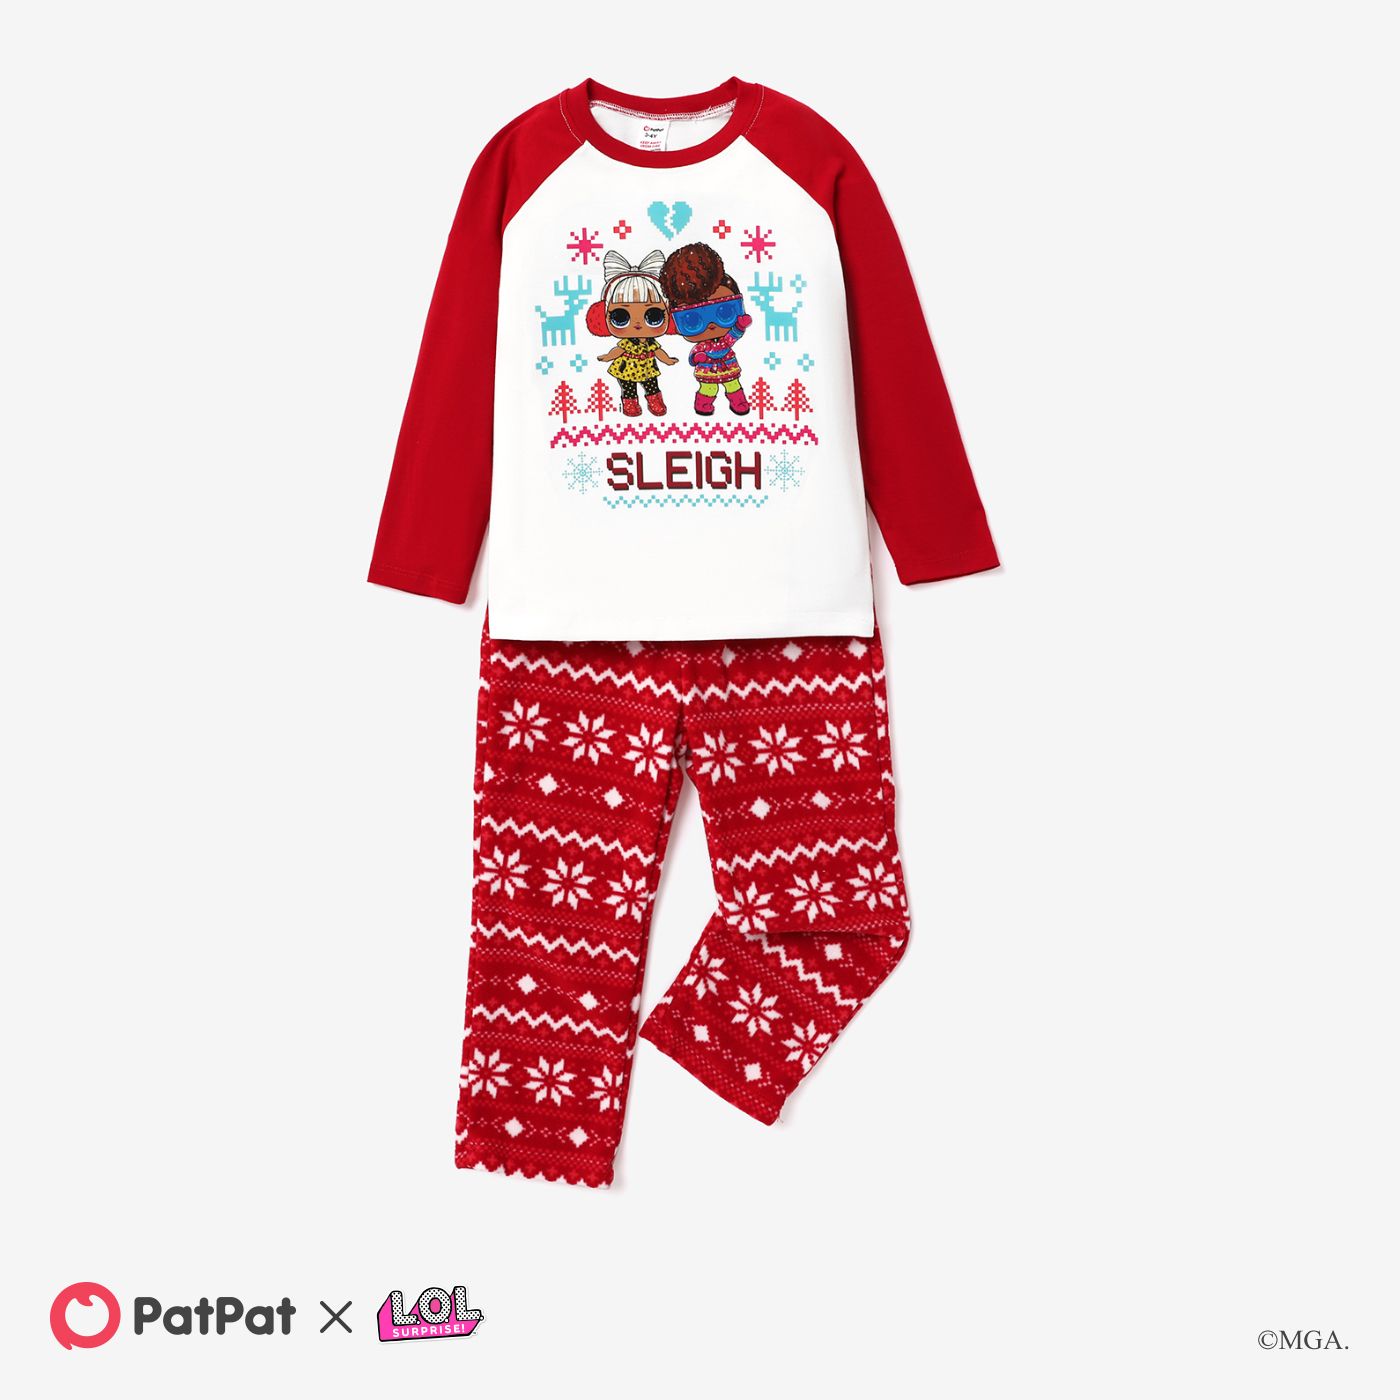 

L.O.L. SURPRISE! Christmas Mommy and Me Character Print Pajamas Sets (Flame Resistant)